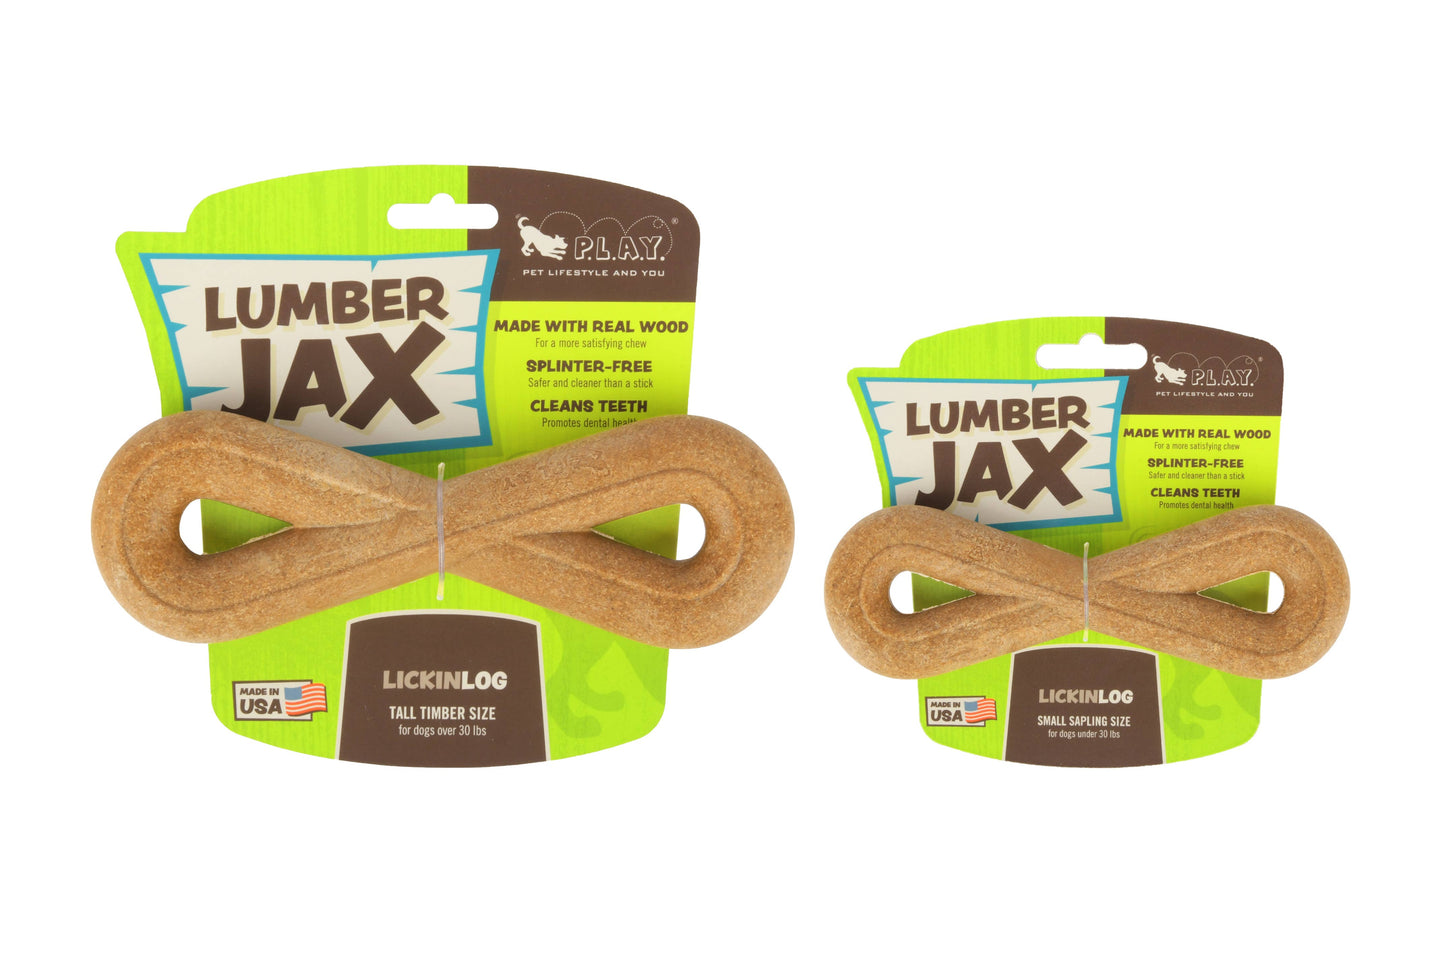 P.L.A.Y. Pet Lifestyle and You - ZoomieRex LumberJax Toy  Image